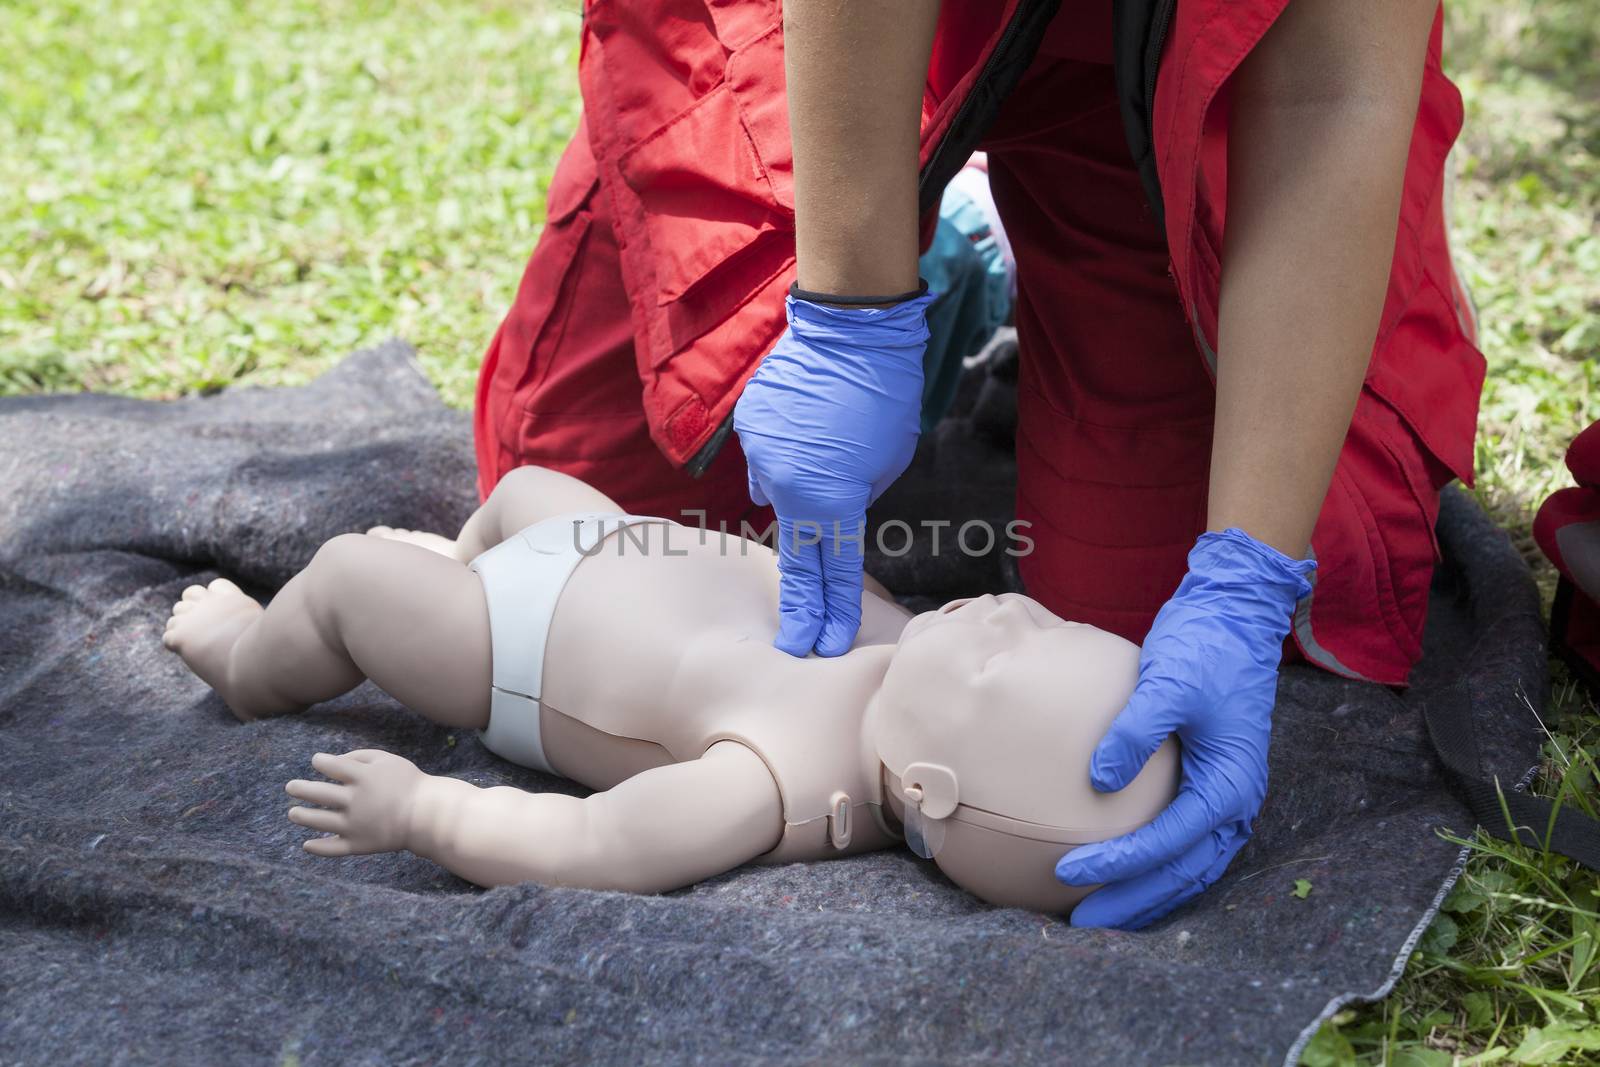 Baby CPR dummy first aid training. Cardiopulmonary resuscitation - CPR.